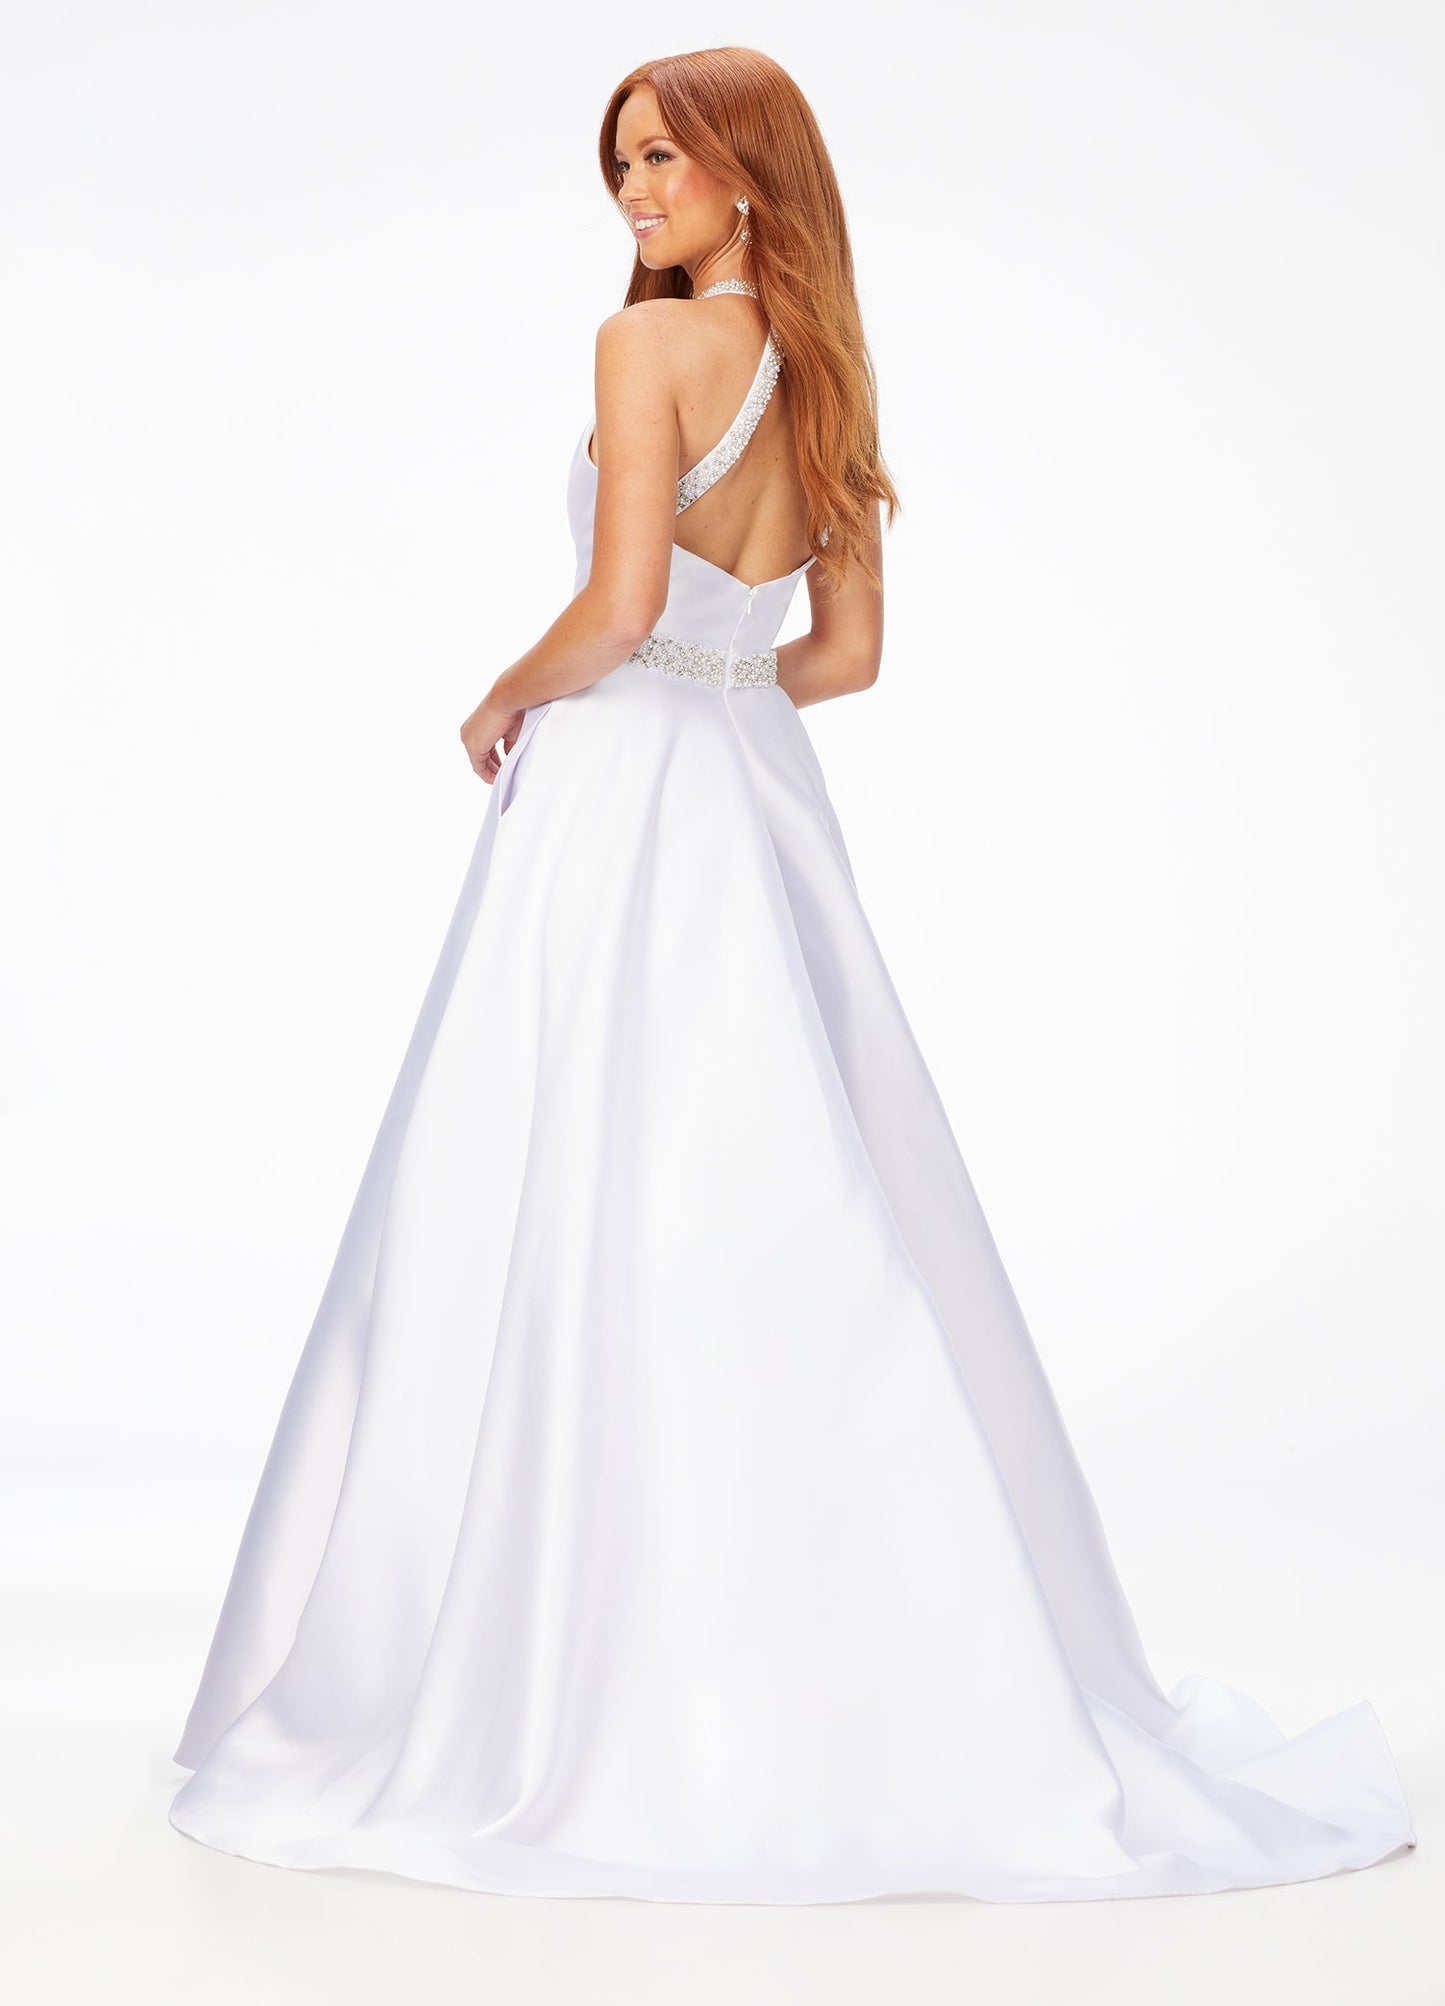 Ashley Lauren 11230 This a line gown features a crystal and pearl encrusted halter neckline and waistline. This gown would be perfect for your next event! Halter Bustier Crystal & Pearl Neckline & Belt Ball Gown Skirt Mikado